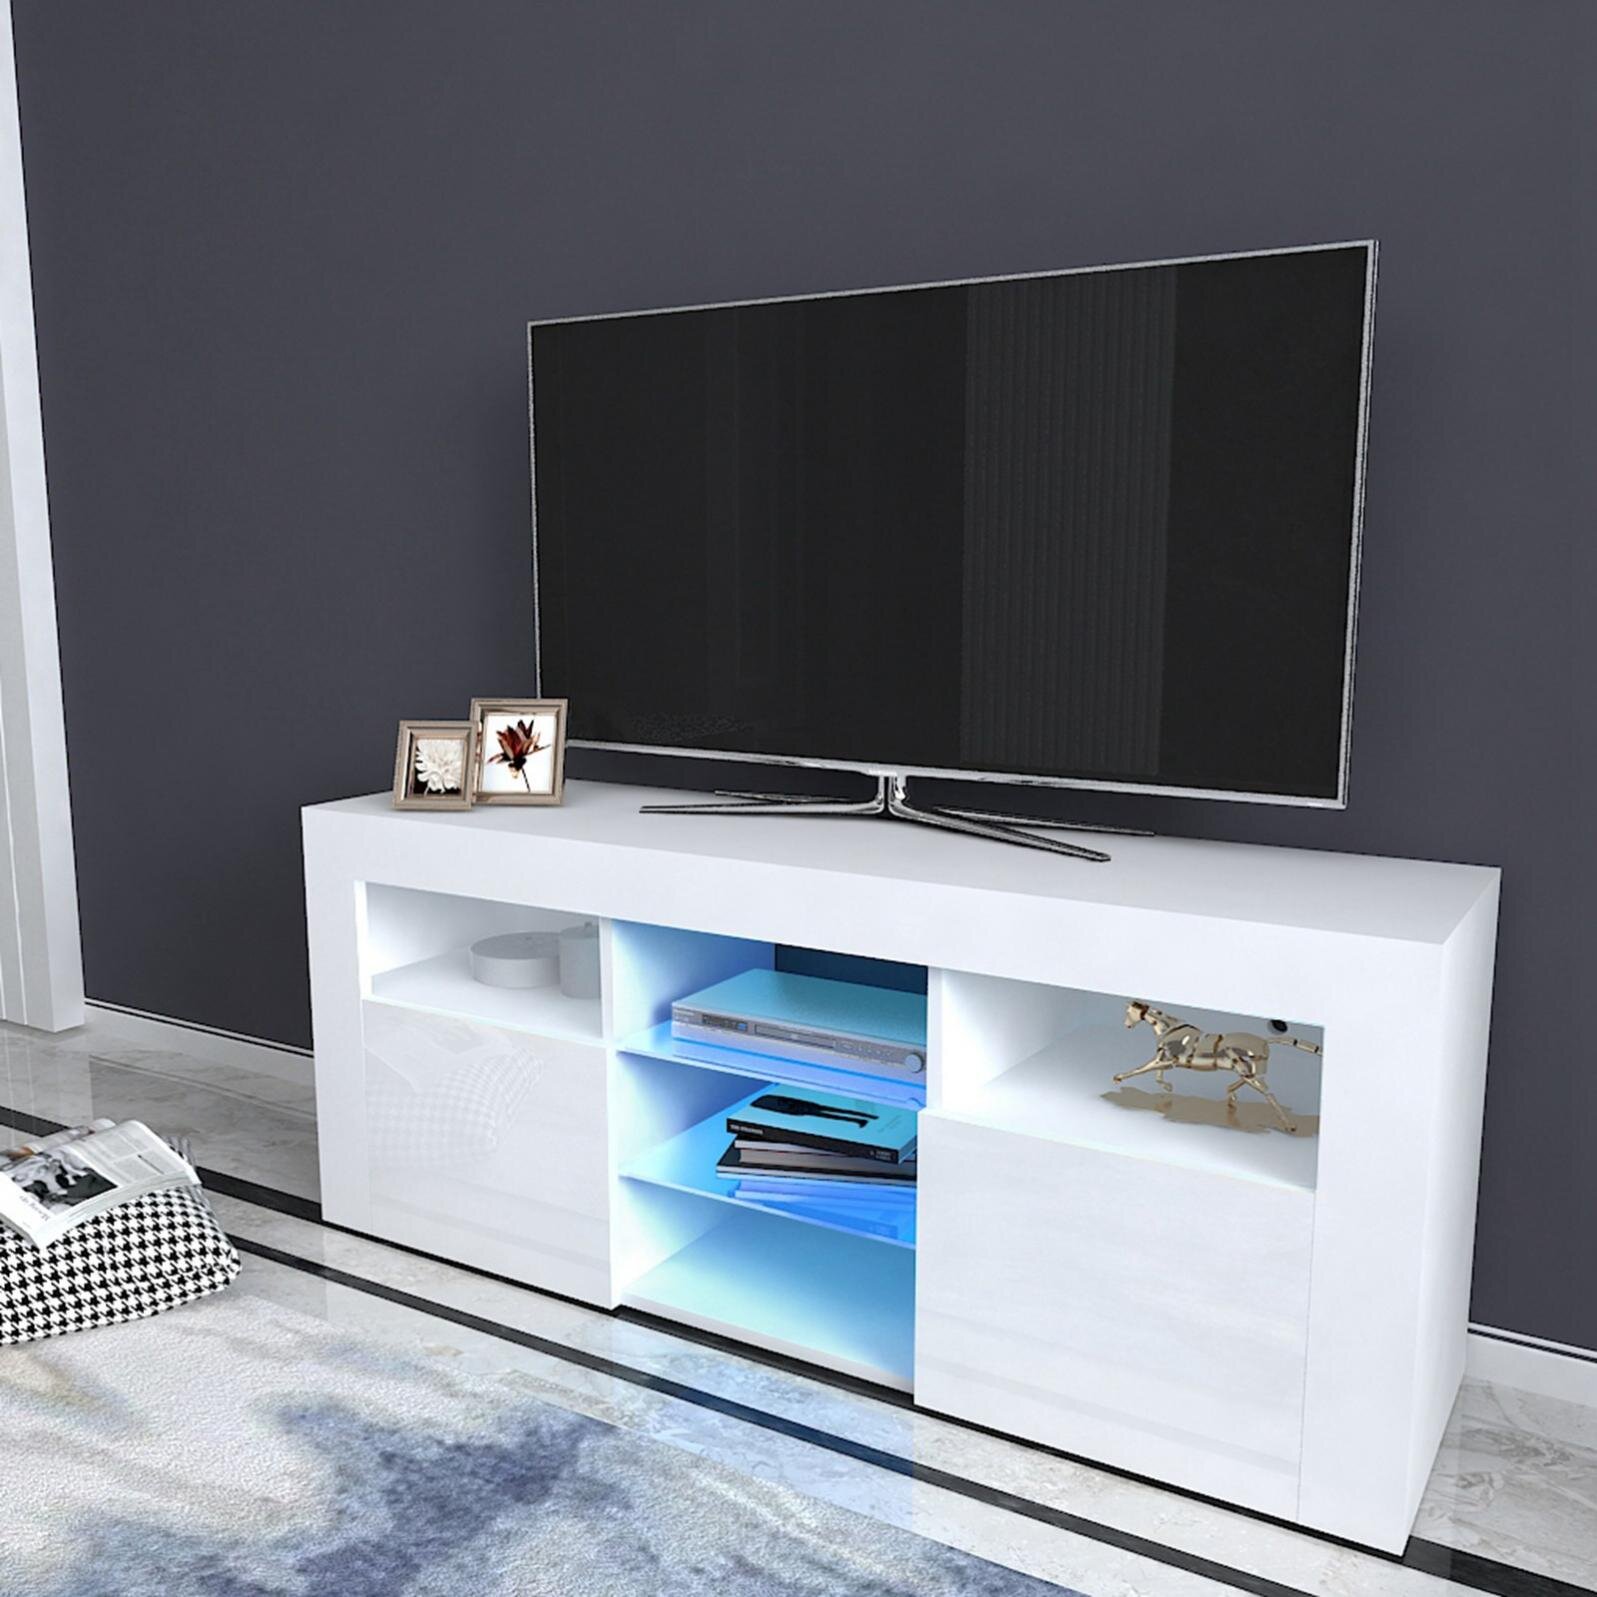 Details about   Living Room Tv Unit Cabinet Gloss Furniture Led Stand Display 